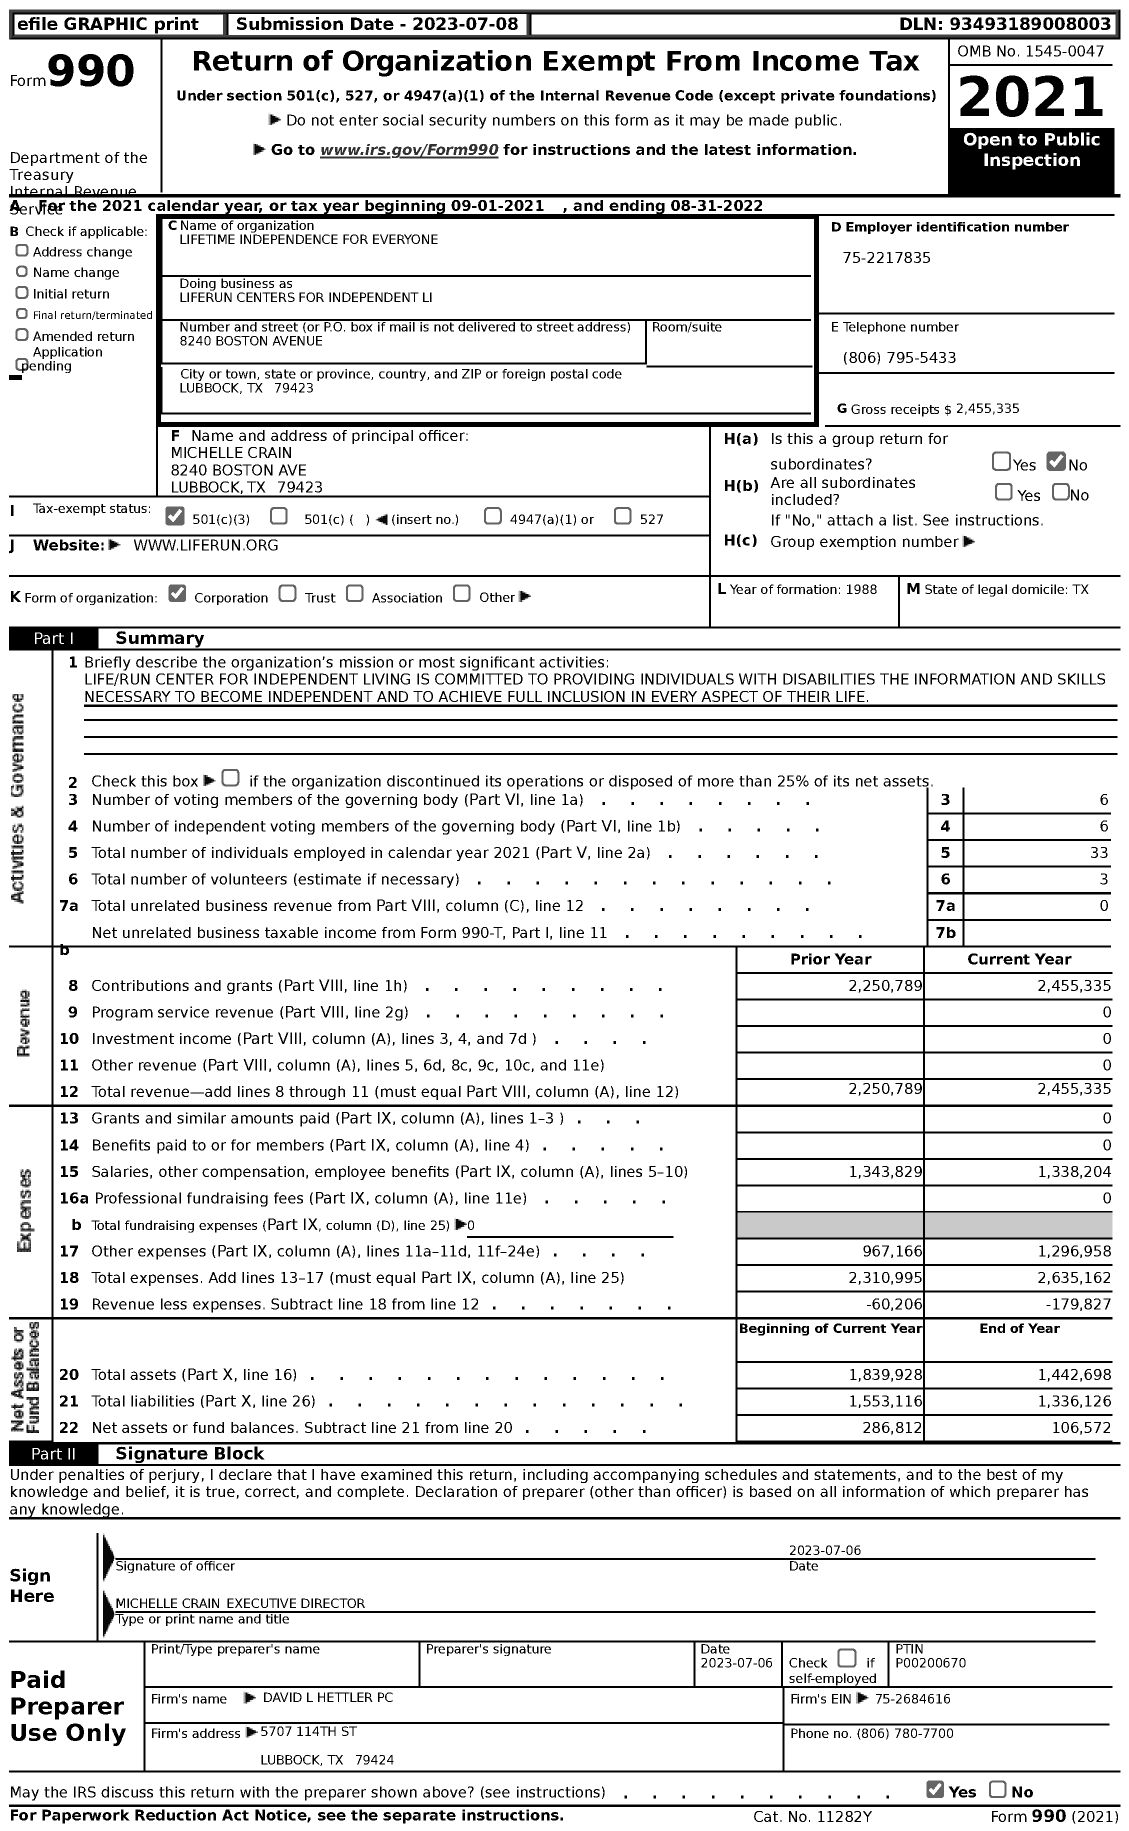 Image of first page of 2021 Form 990 for LifeRun Centers for Independent (LI)